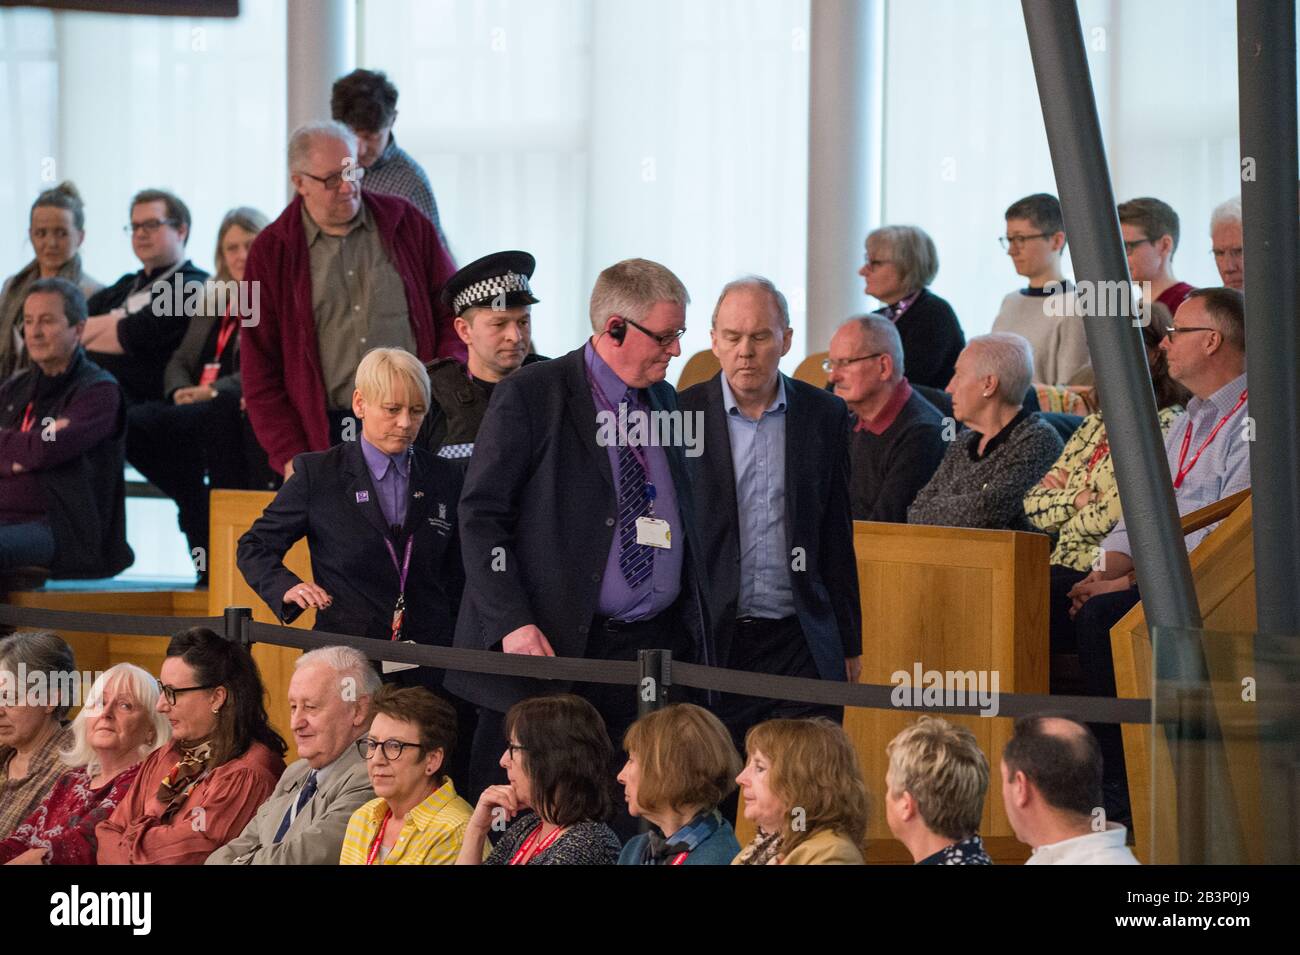 Edinburgh, UK. 5th Mar, 2020. Pictured: A protestor is escorted out of the gallery in the debating chamber during the end of First Ministers Questions. Parliament was suspended whilst the protestor was escorted outside by Police and security. Scenes from First Ministers Questions at the Scottish Parliament in Holyrood, Edinburgh. Credit: Colin Fisher/Alamy Live News Stock Photo